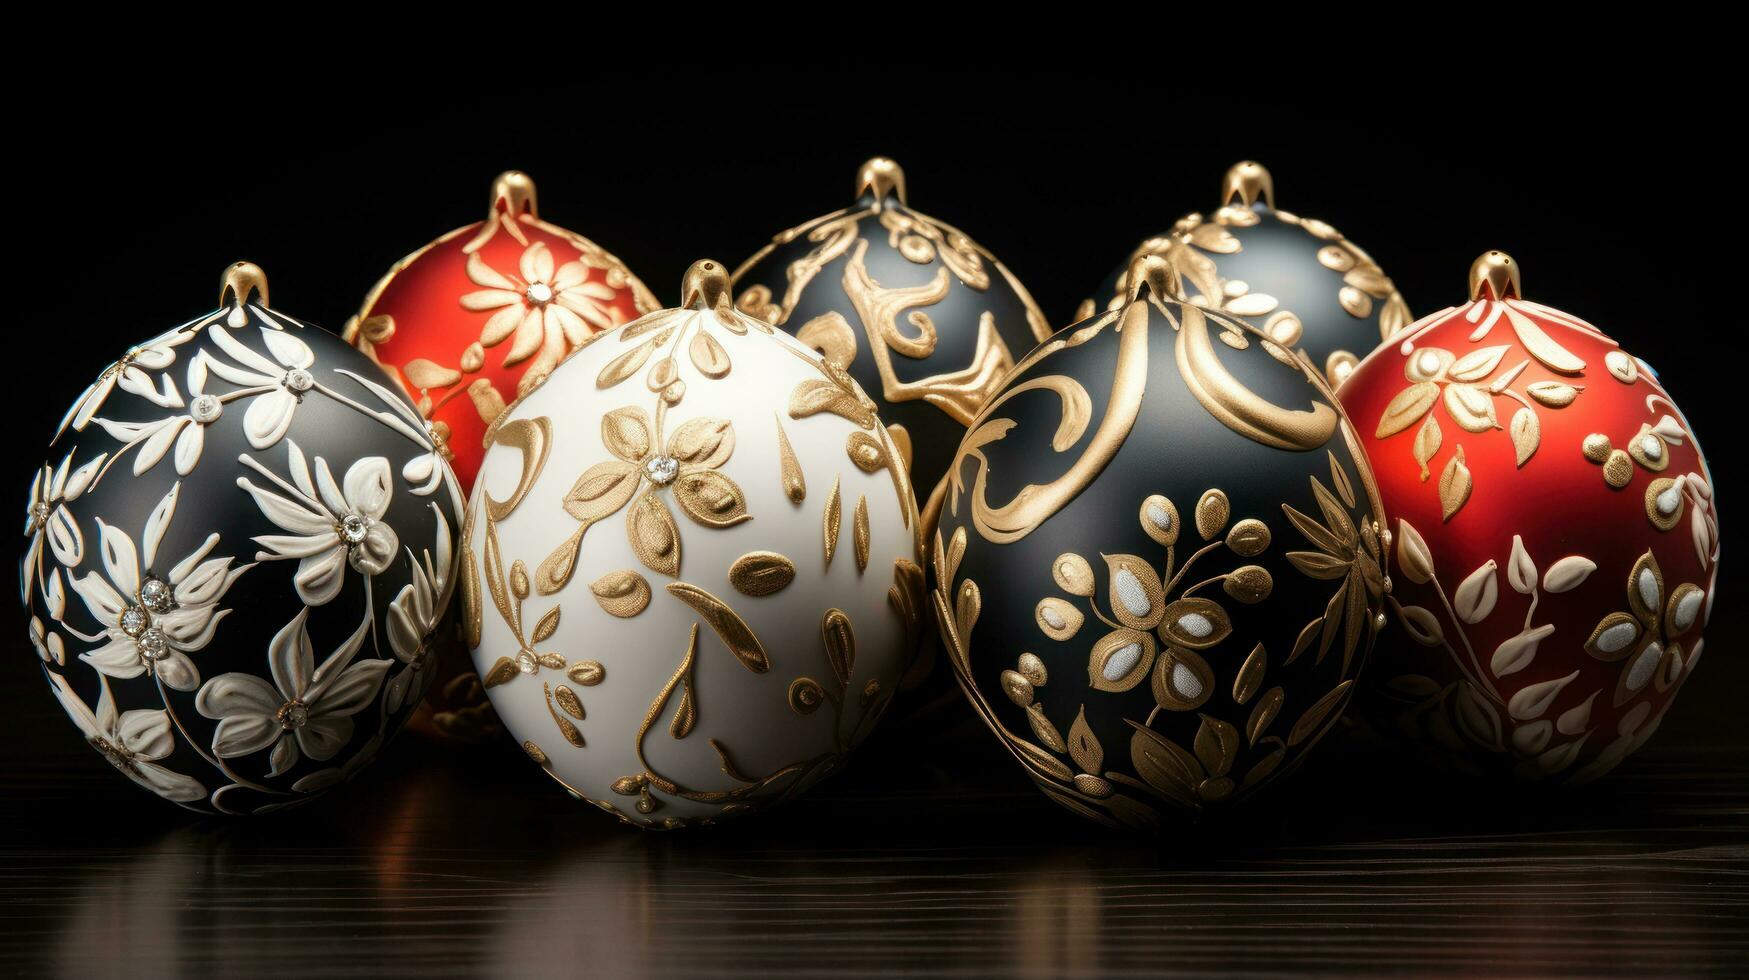 Elegant ornaments. Gold, silver, and red ornaments on a black background photo